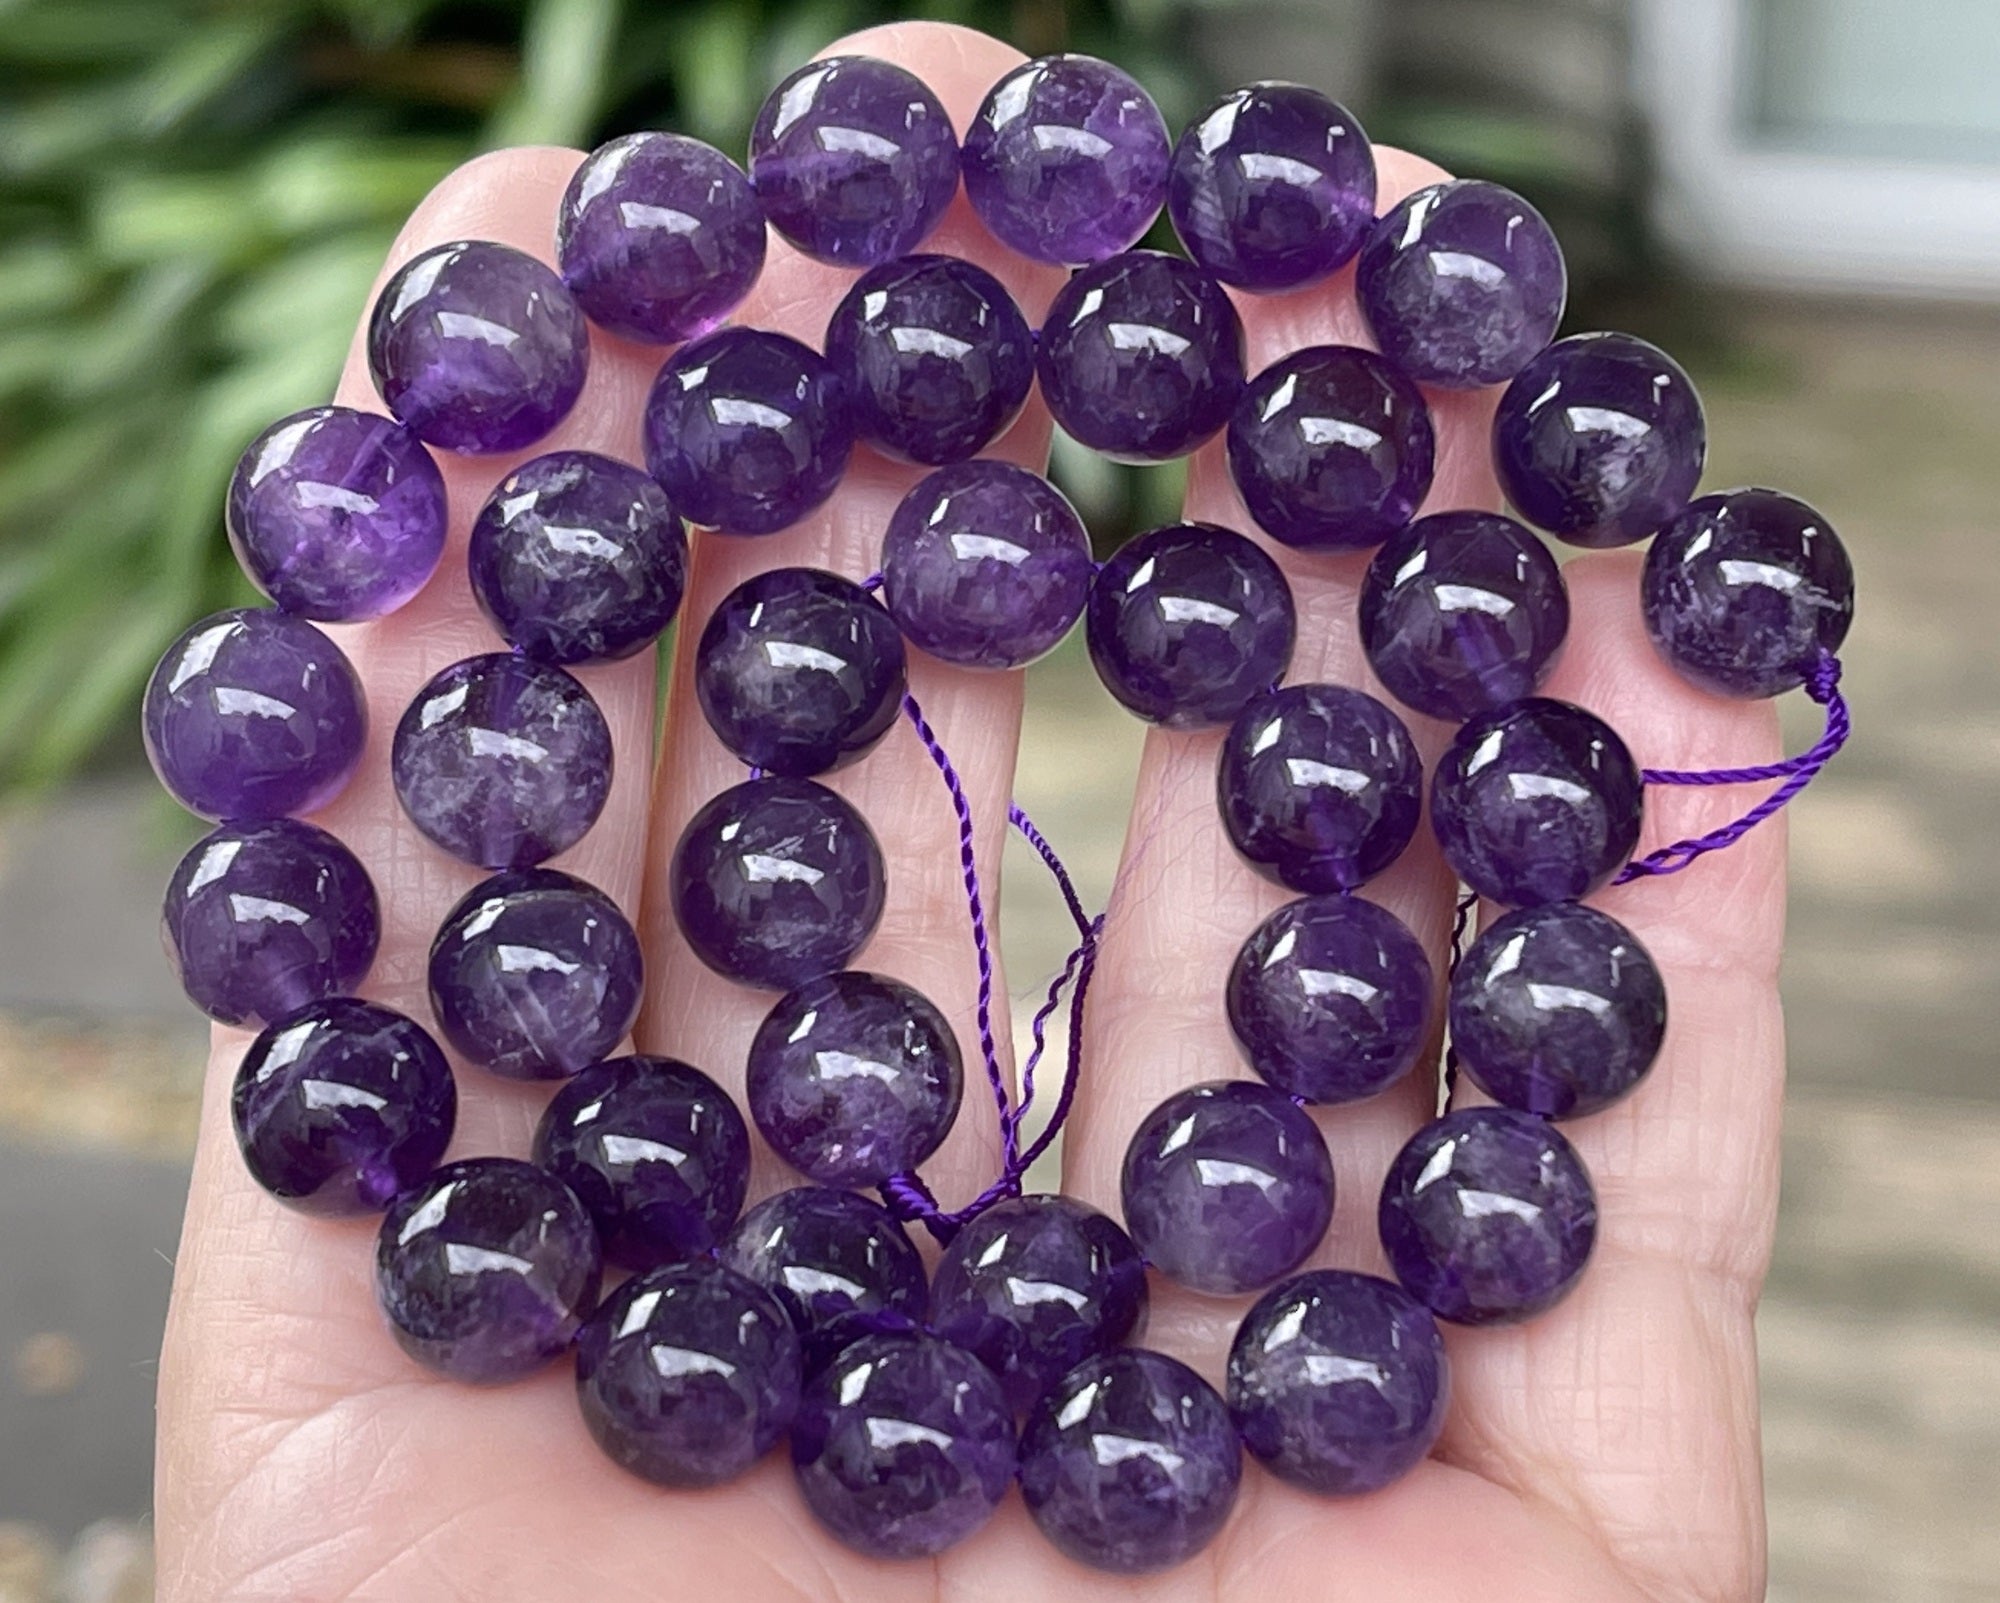 16 IN Strand 8-12 mm Amethyst Fine Gem Quality Nugget Faceted